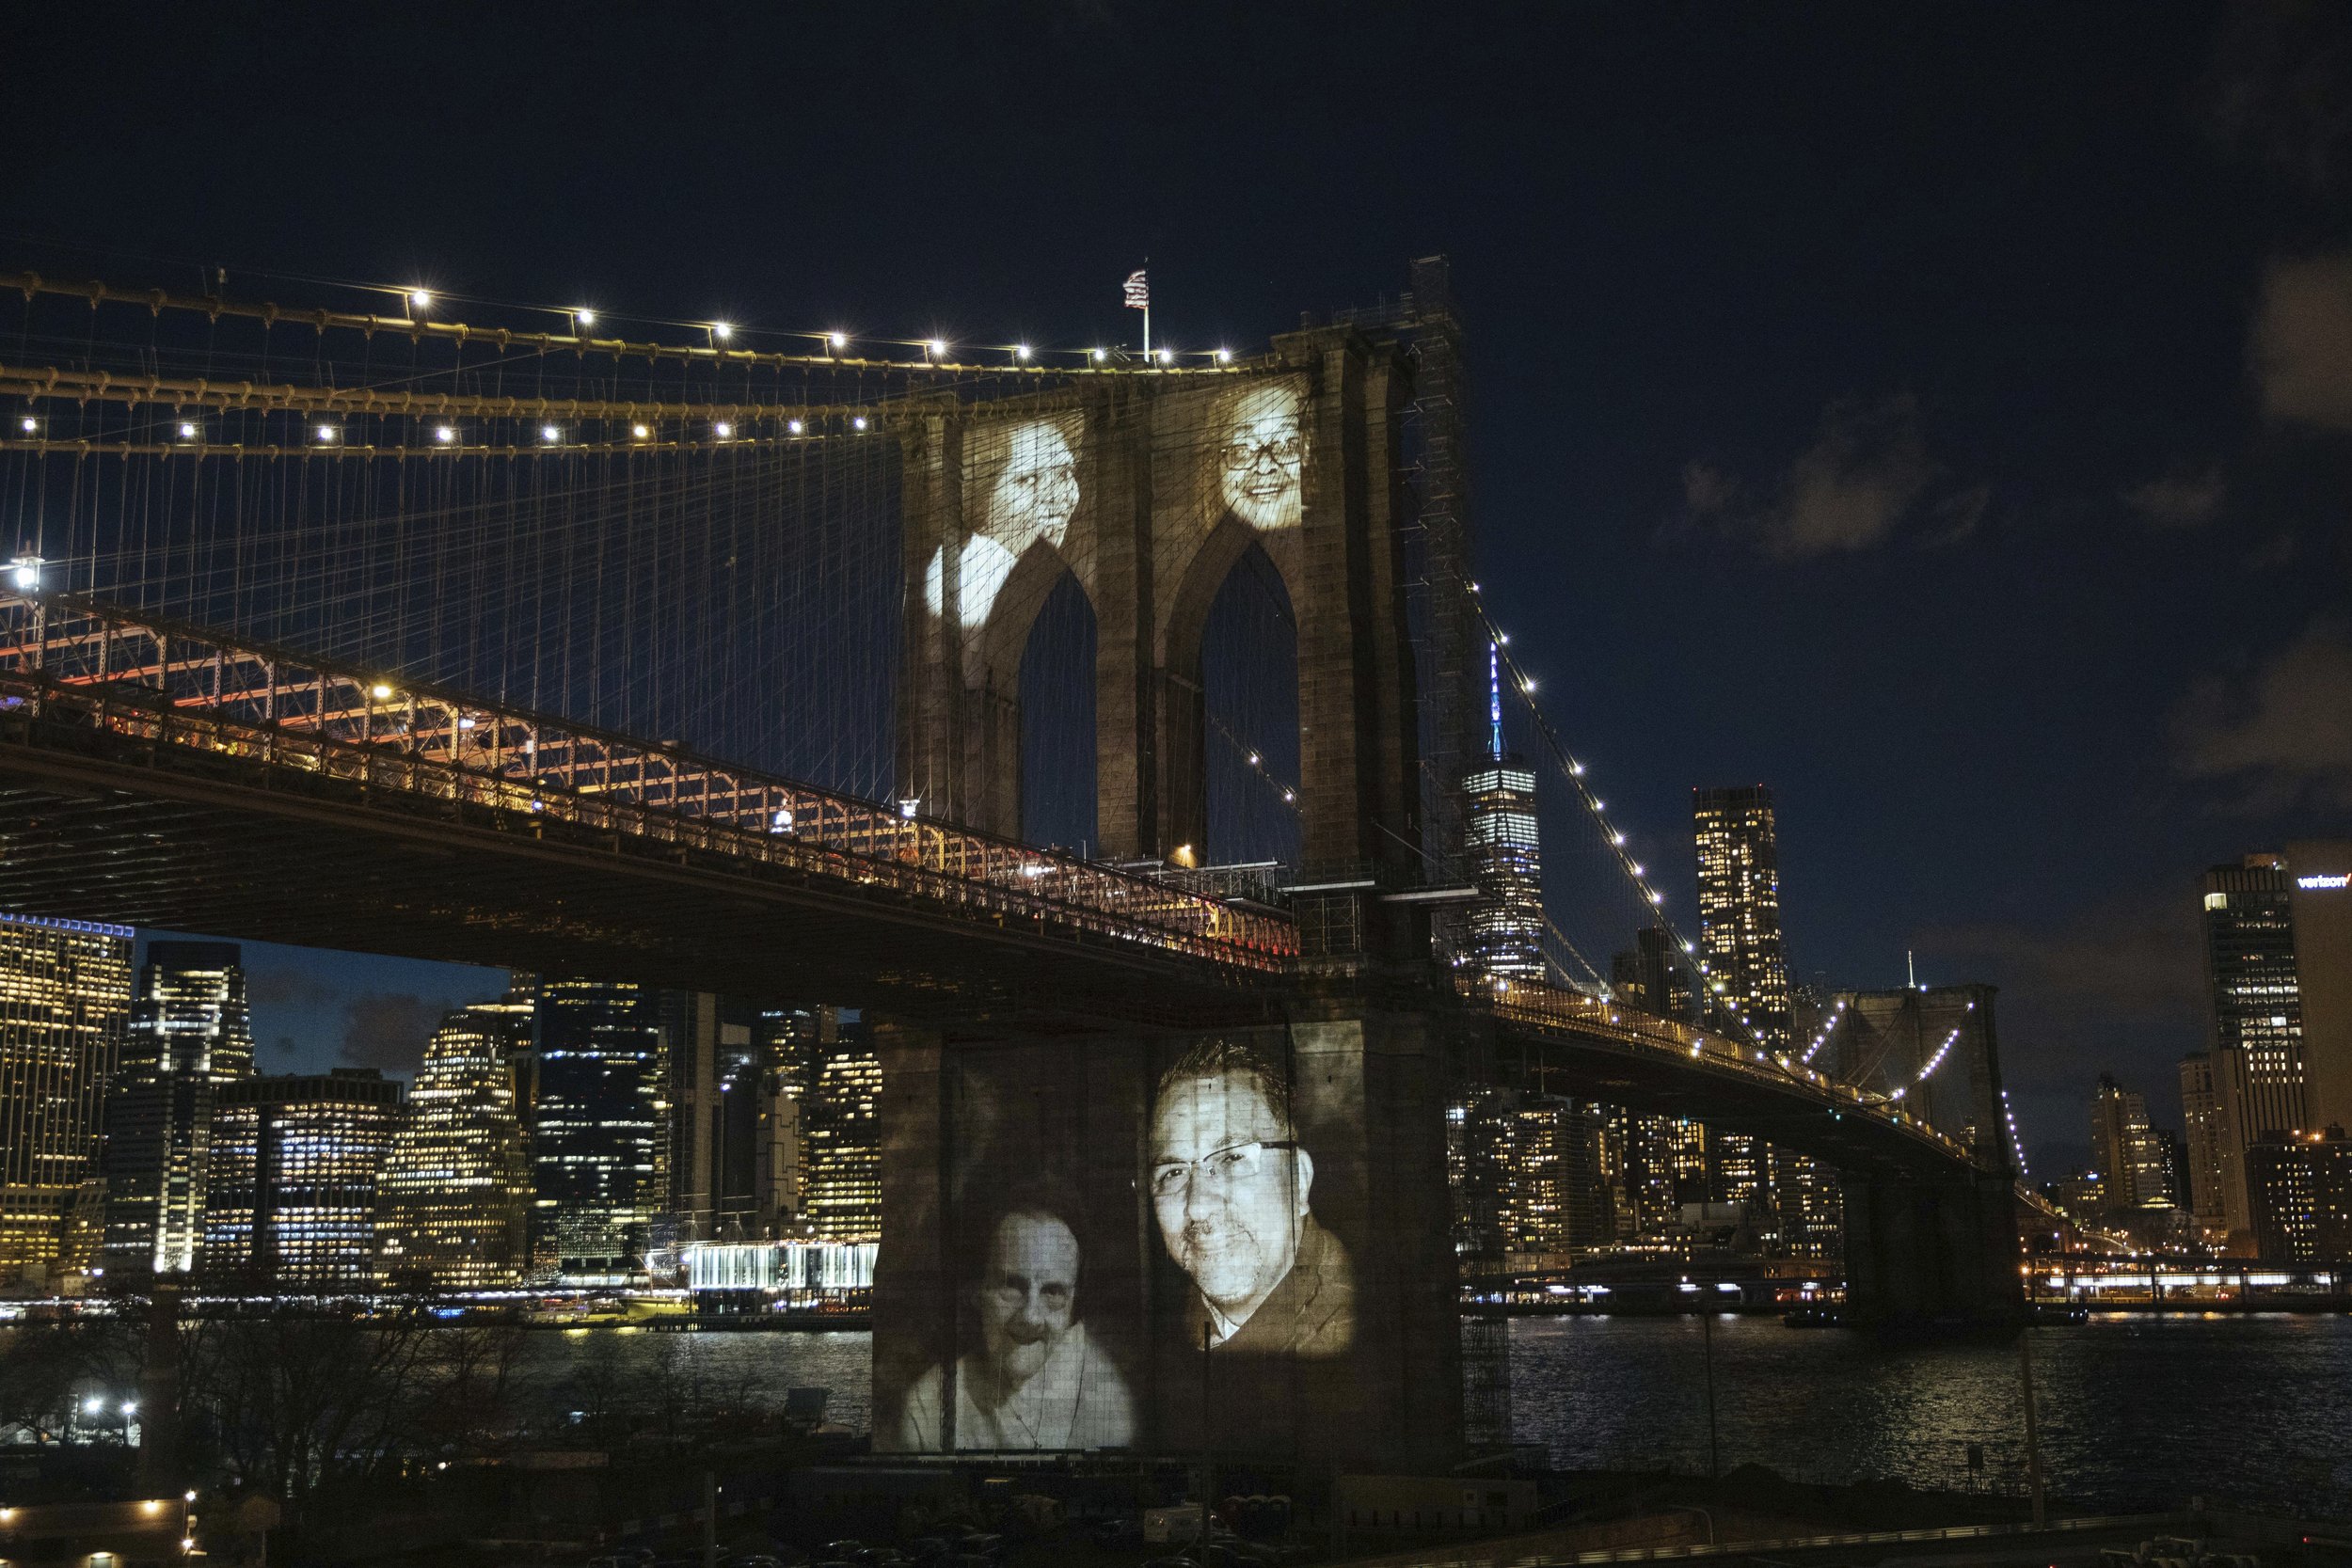  New Yorkers who died during the coronavirus pandemic are projected onto the Brooklyn Bridge during a commemoration ceremony Sunday, March 14, 2021, in Brooklyn, NY. (AP Photo/Kevin Hagen) 